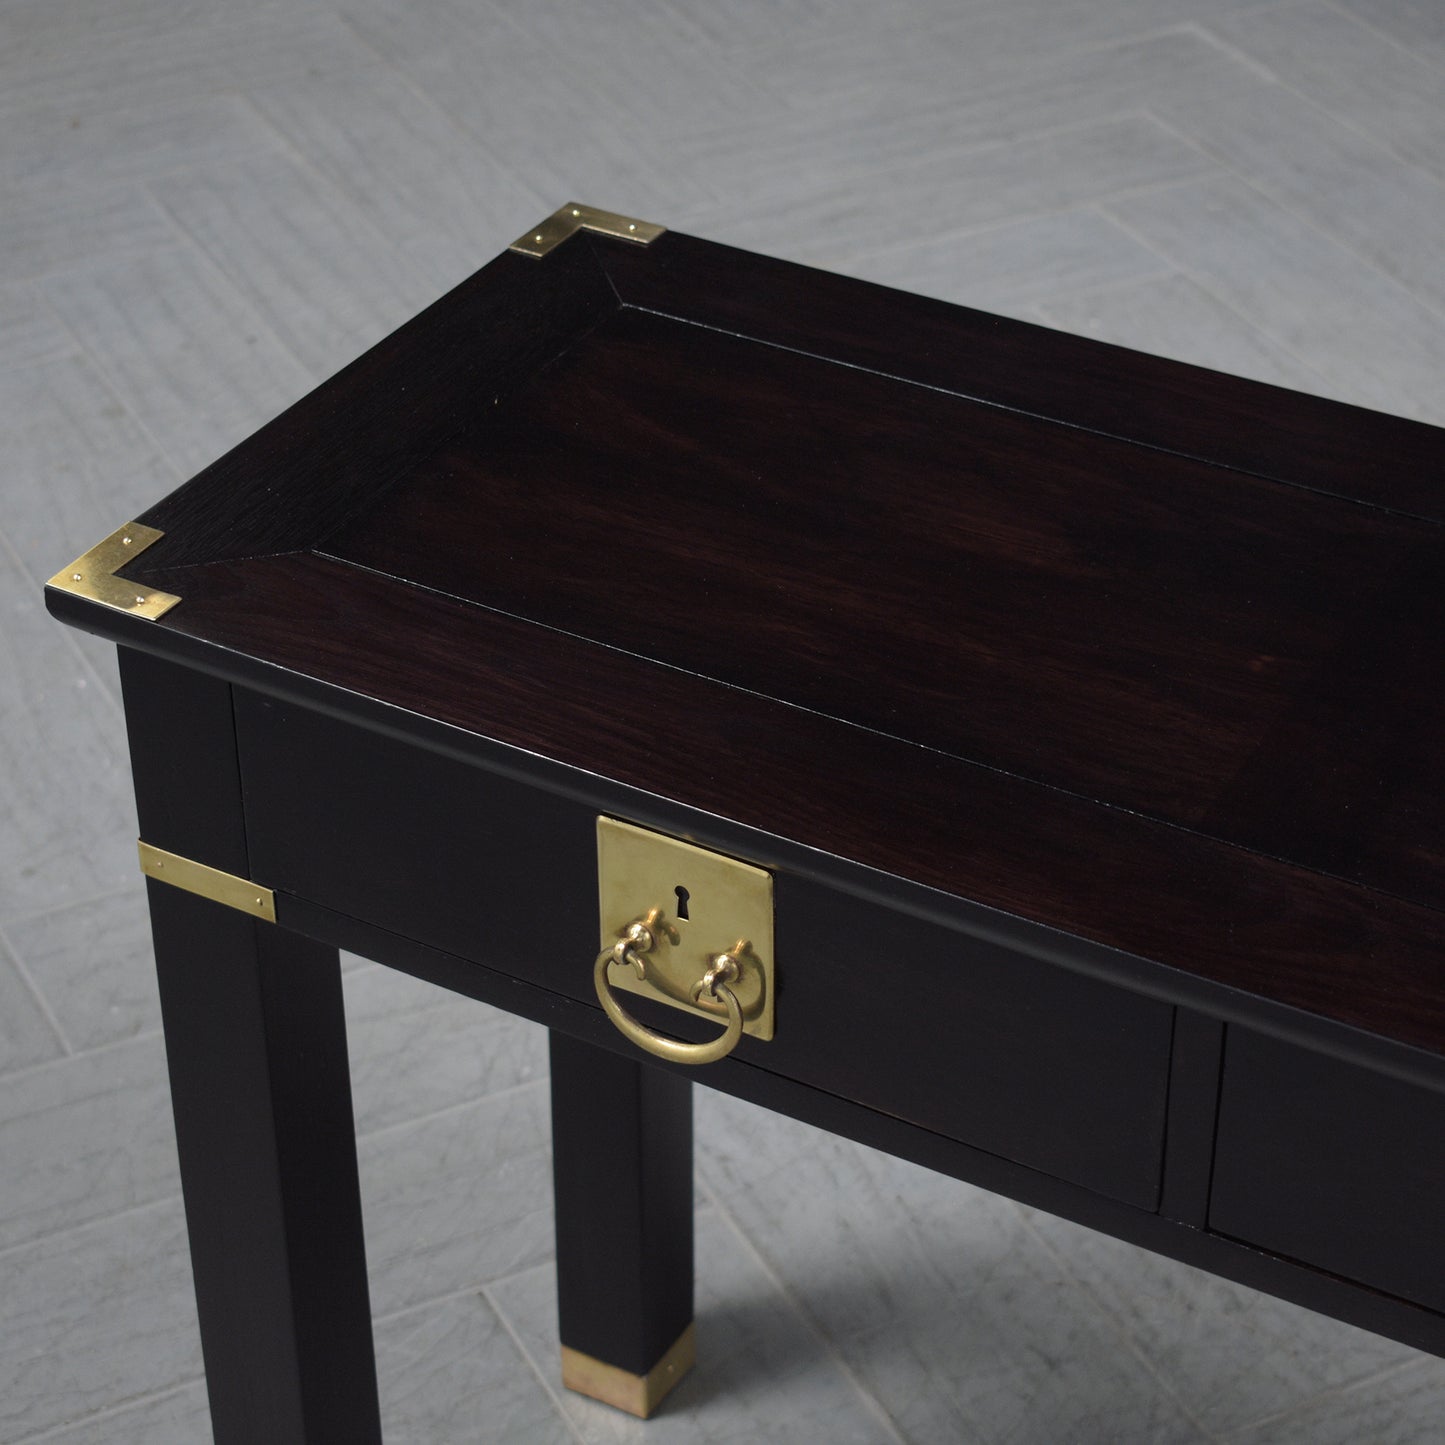 Vintage White Oak Campaign-Style Console with Brass Accents